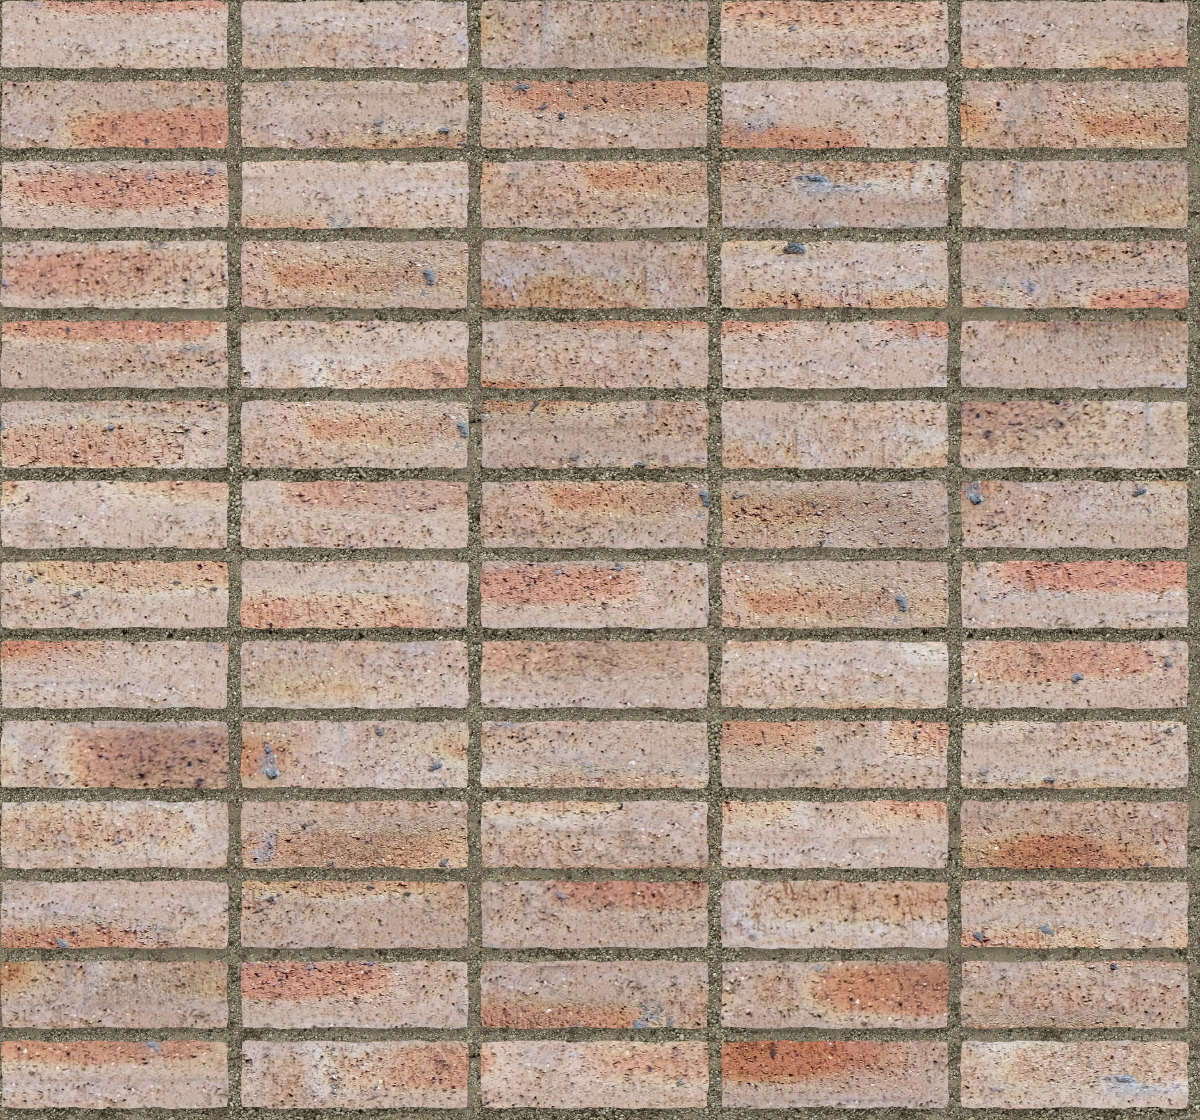 A seamless brick texture with dragfaced brick units arranged in a Stack pattern